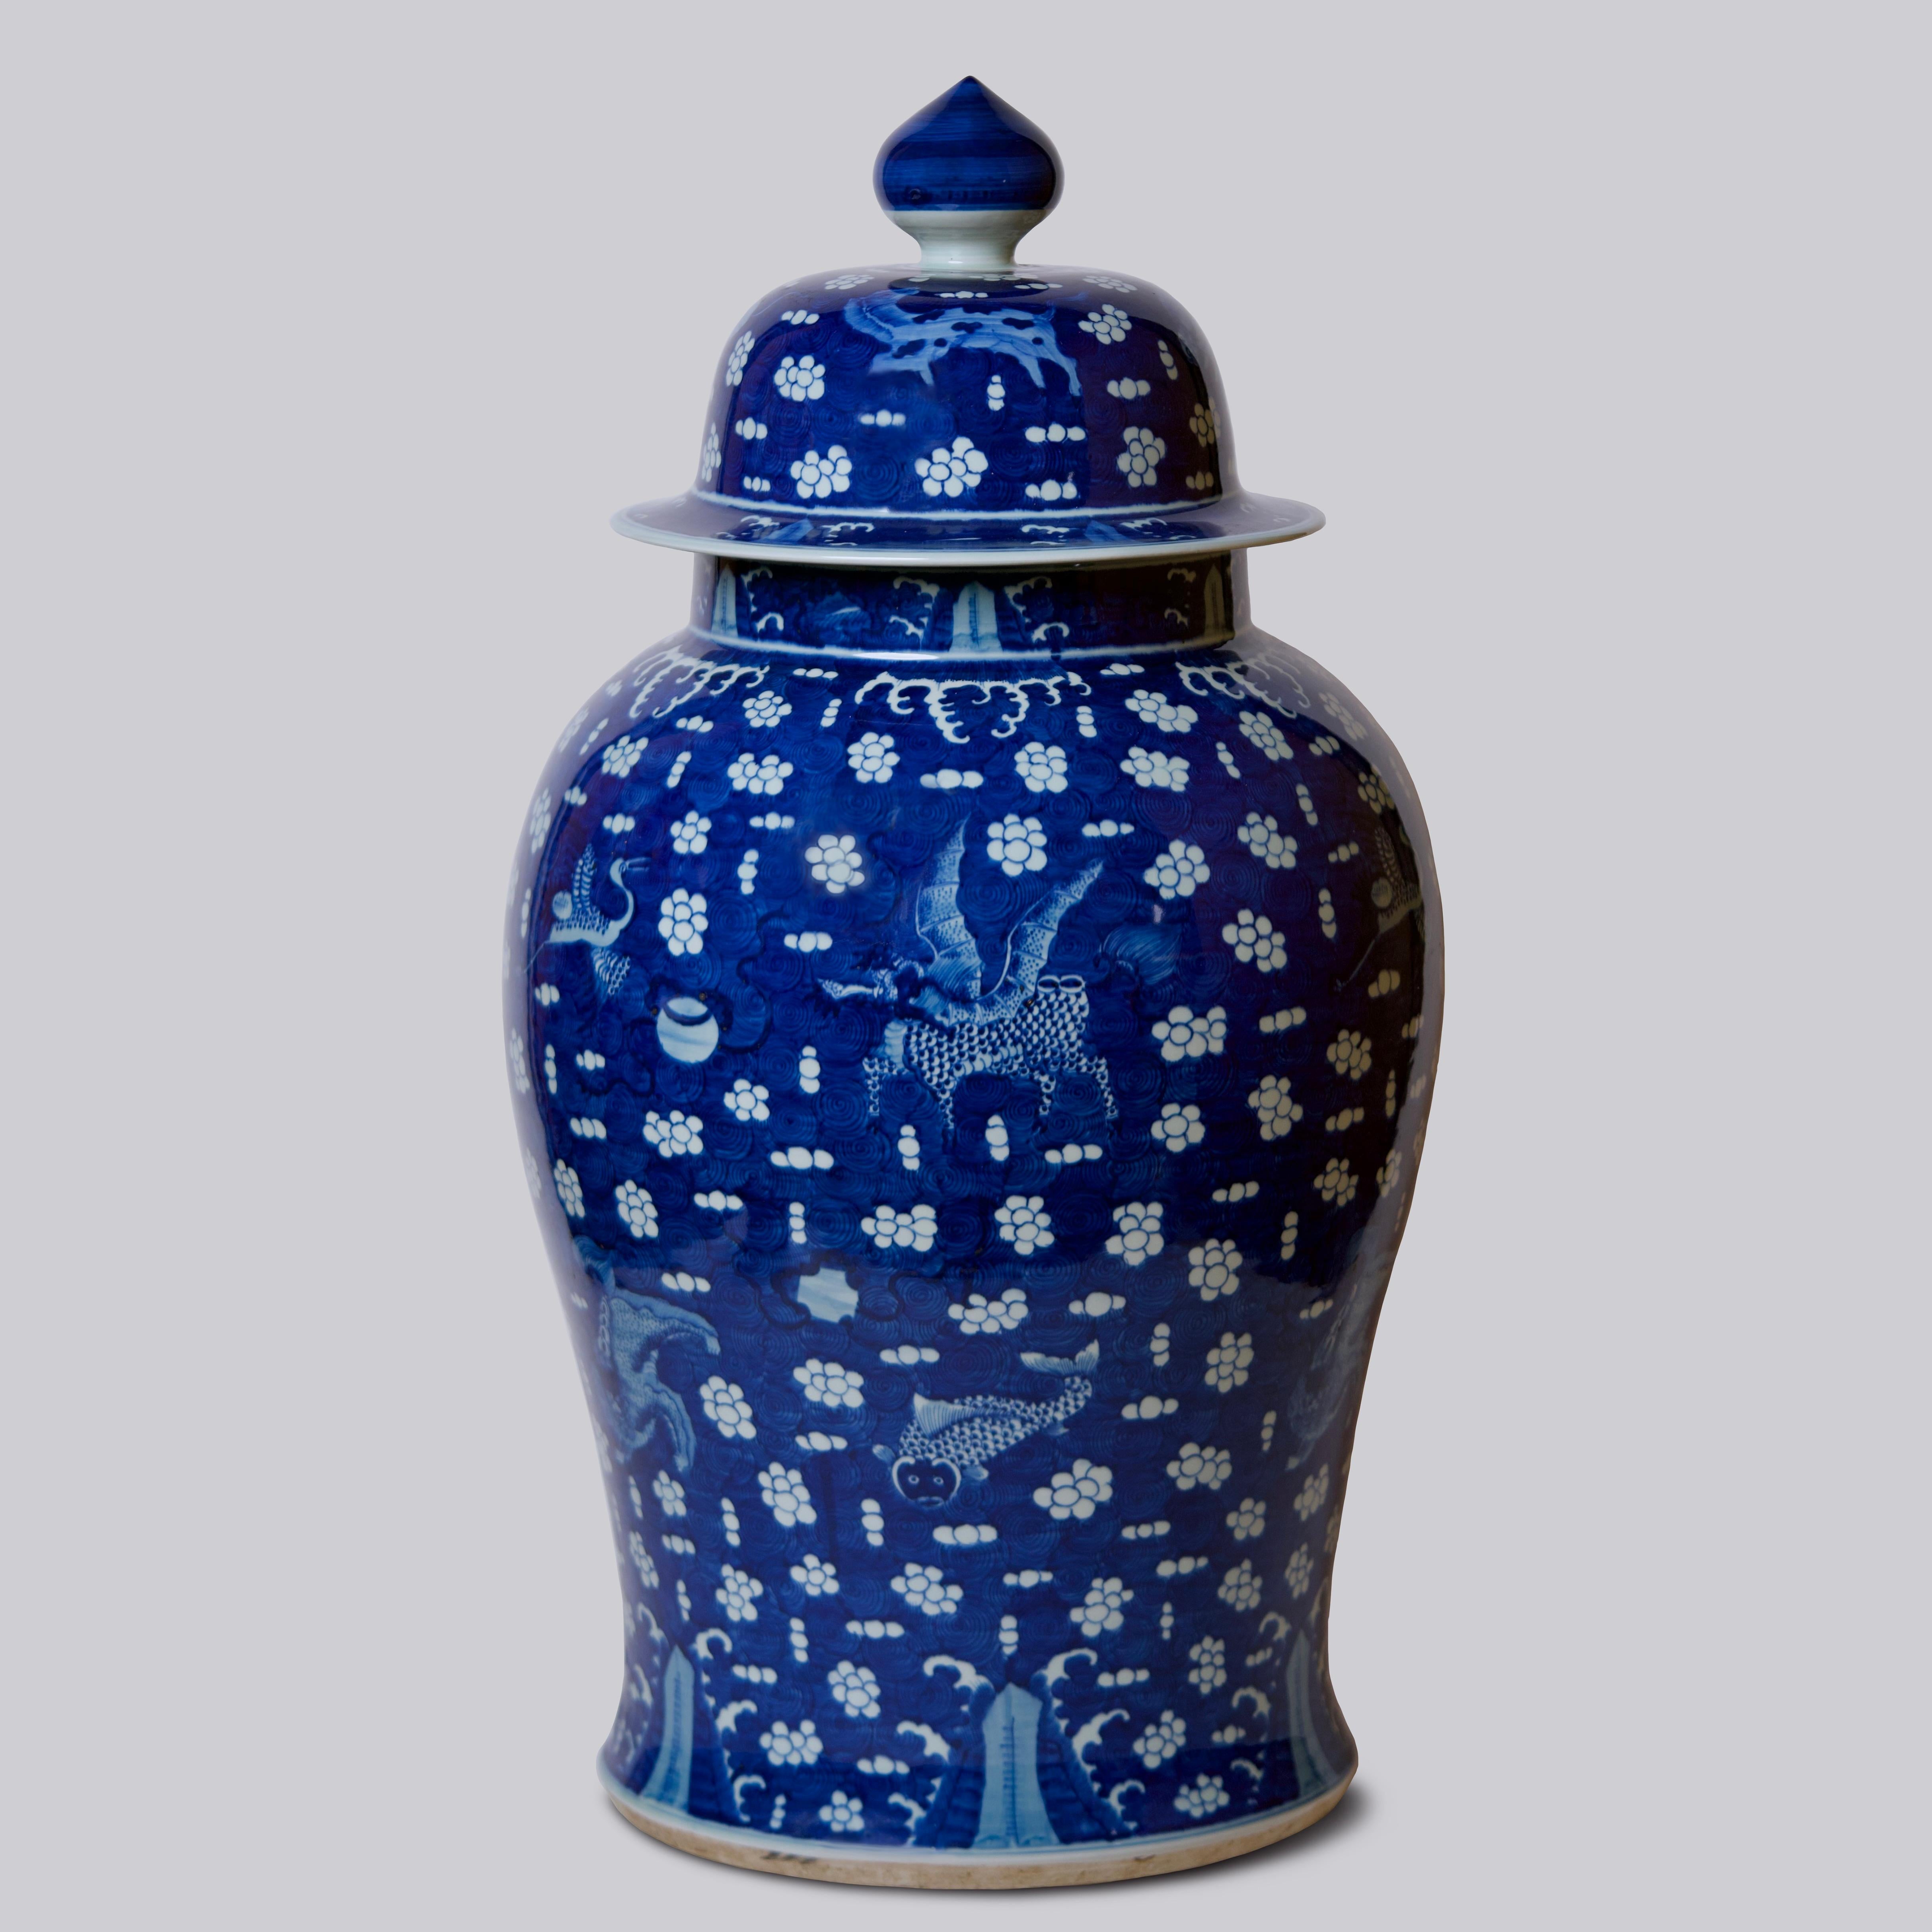 This temple jar is a traditional porcelain vessel from Jingdezhen, a town long distinguished by imperial patronage. An uncommon blue field with auspicious animals cavorting among the clouds sets this vase apart from the blue and white we most